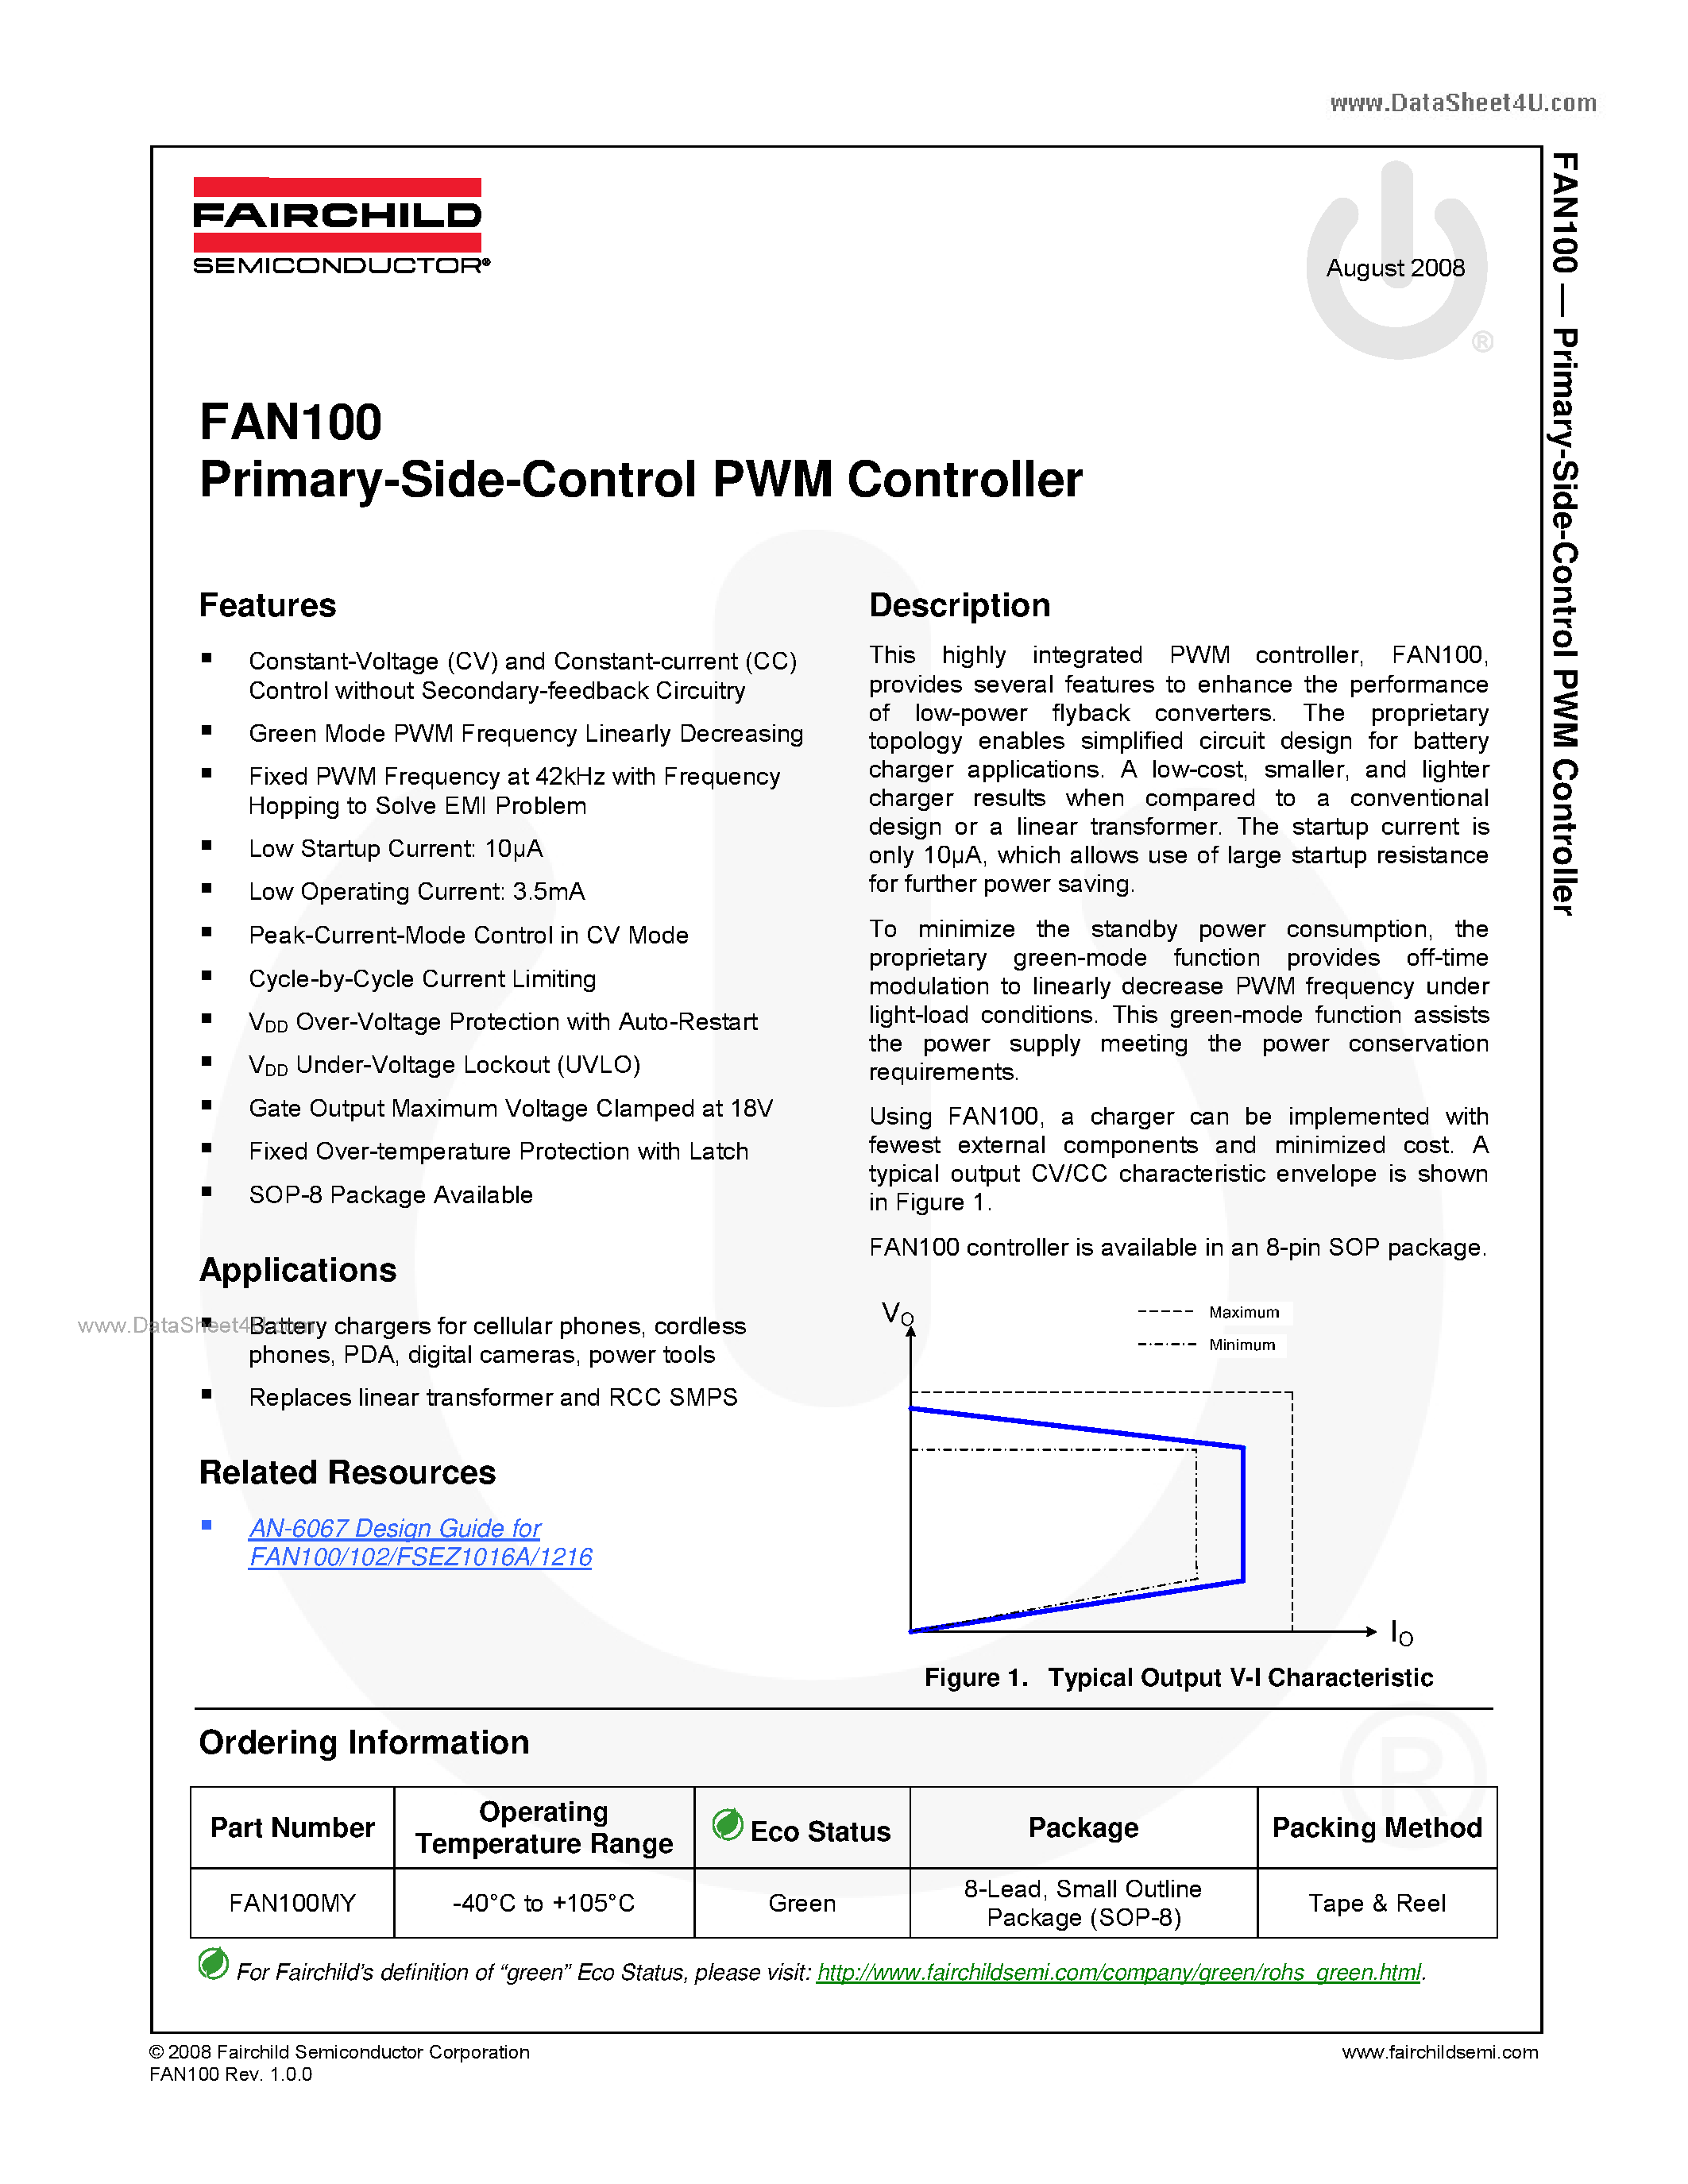 Datasheet FAN100 - Primary-Side-Control PWM Controller page 1